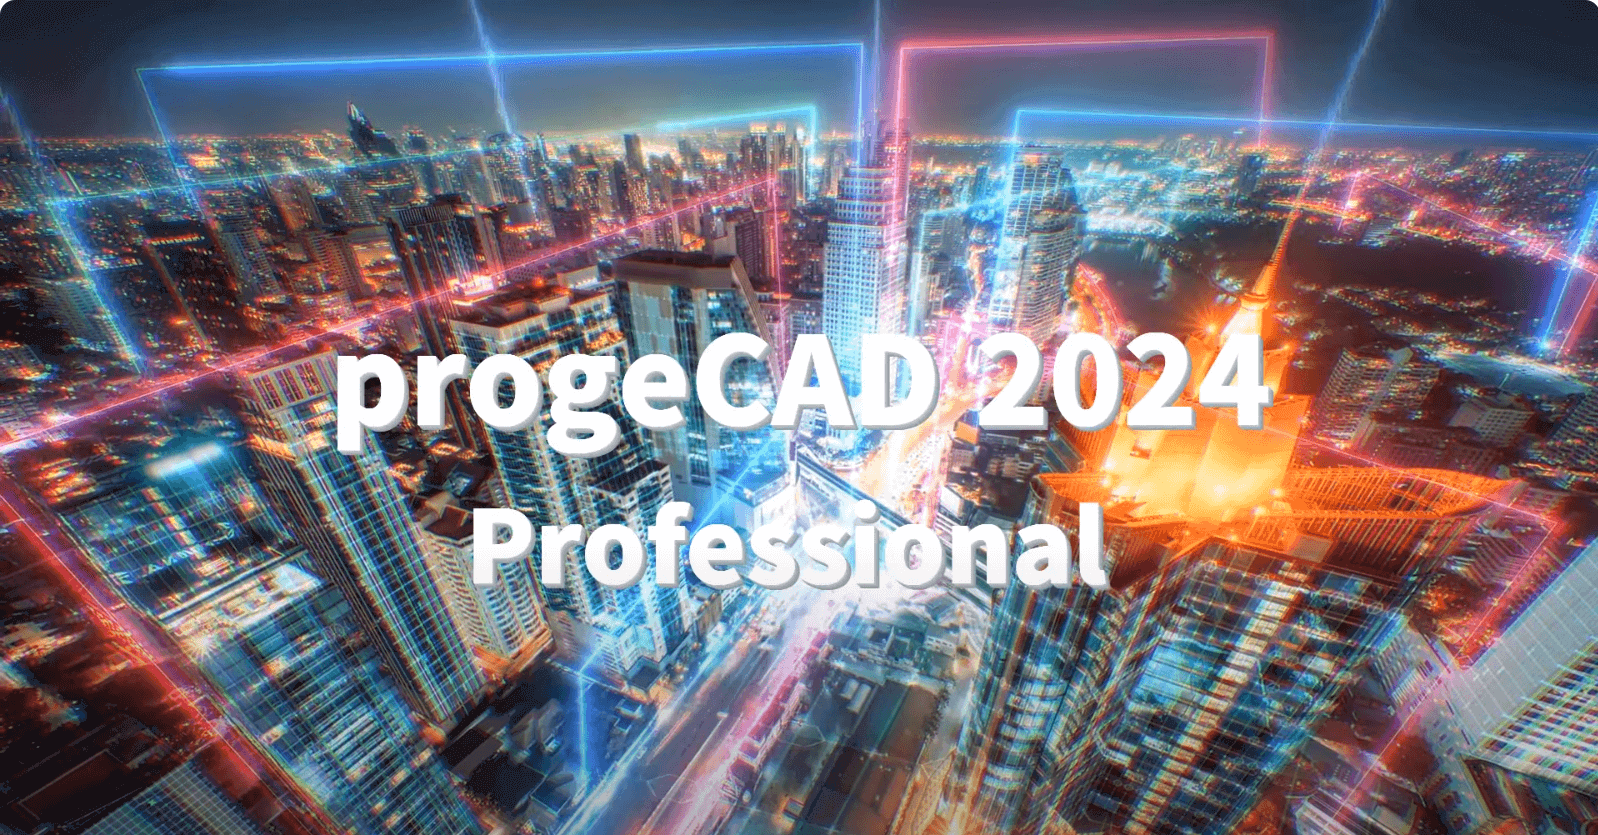 progeCAD Professional 2024: WHAT'S NEW? - The Short Story